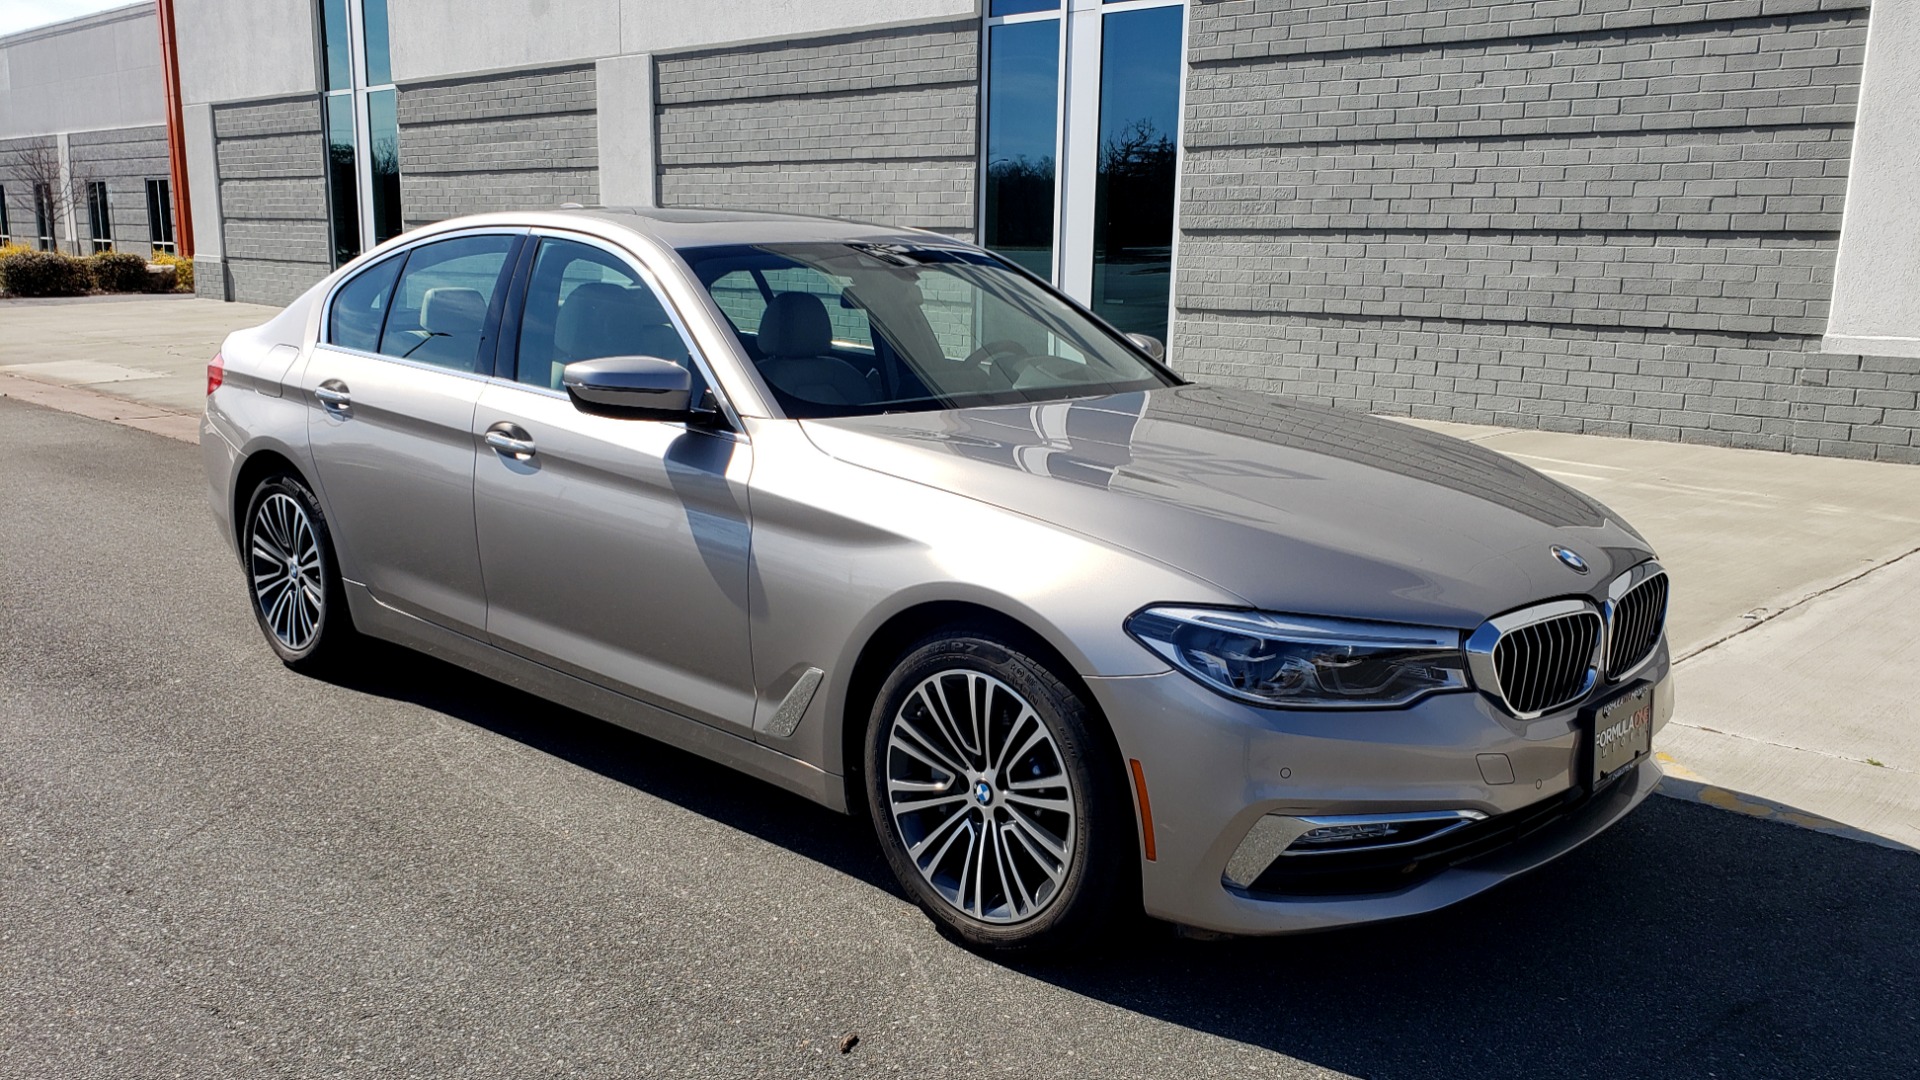 Used 2018 BMW 5 SERIES 540IXDRIVE PREMIUM / DRVR ASST PLUS / LUX PKG / APPLE CARPLAY for sale Sold at Formula Imports in Charlotte NC 28227 5